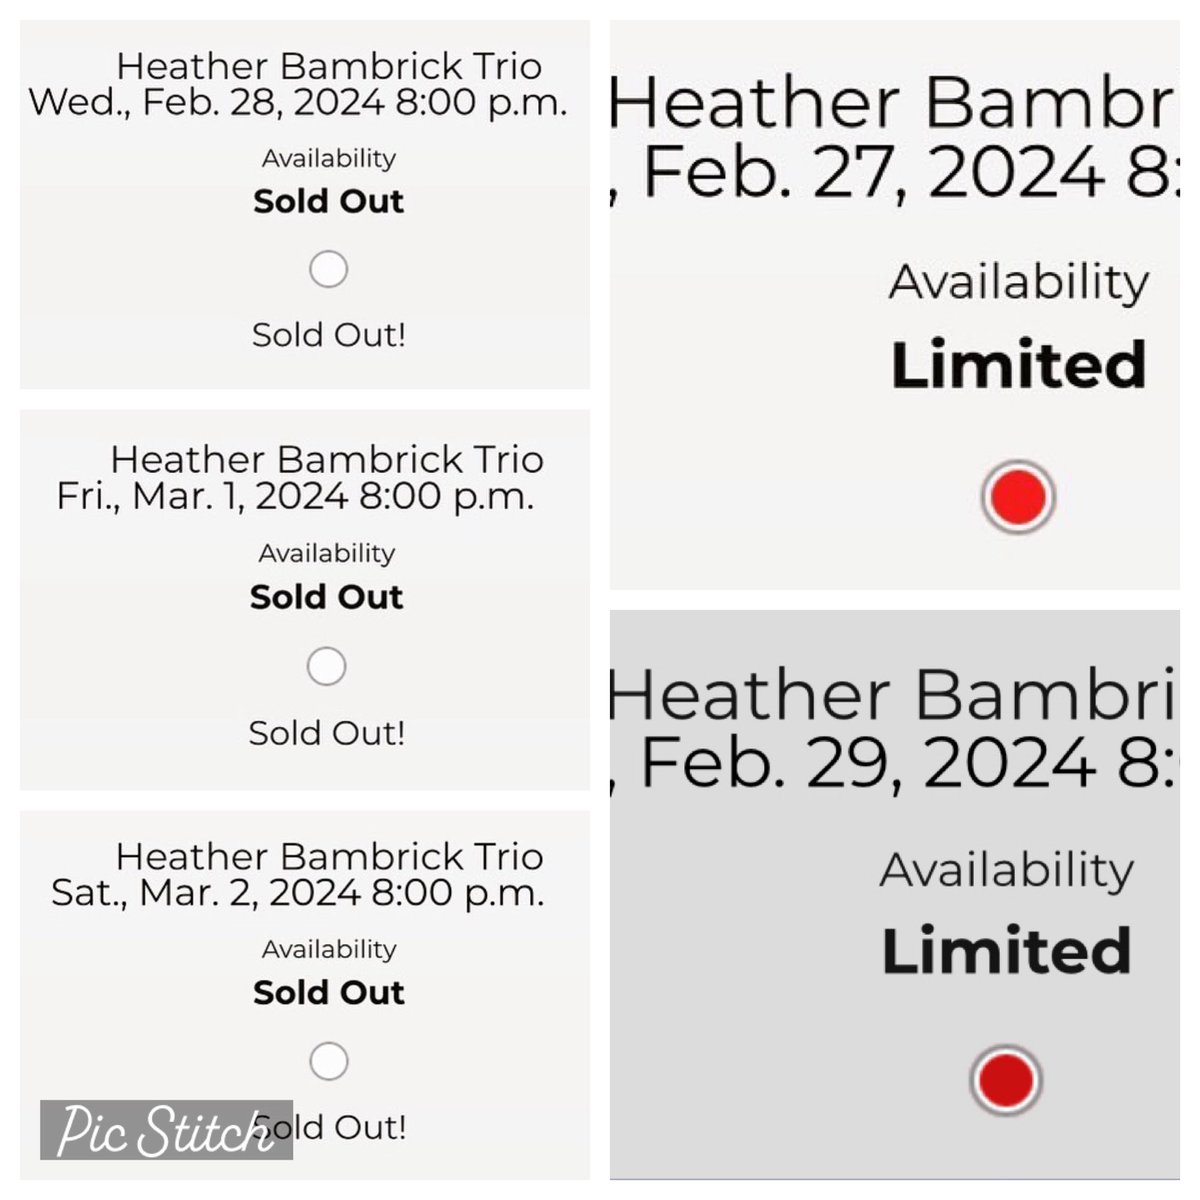 Woohoo!! Three of our five shows are now sold out and there are limited tickets available for the other two!! I really hope you’ll grab your tickets now for Tue Feb 27 and/or Thu Feb 29, and enjoy #JazzliciousWinterfest2024!! Tickets and info at jazzlicious.ca.